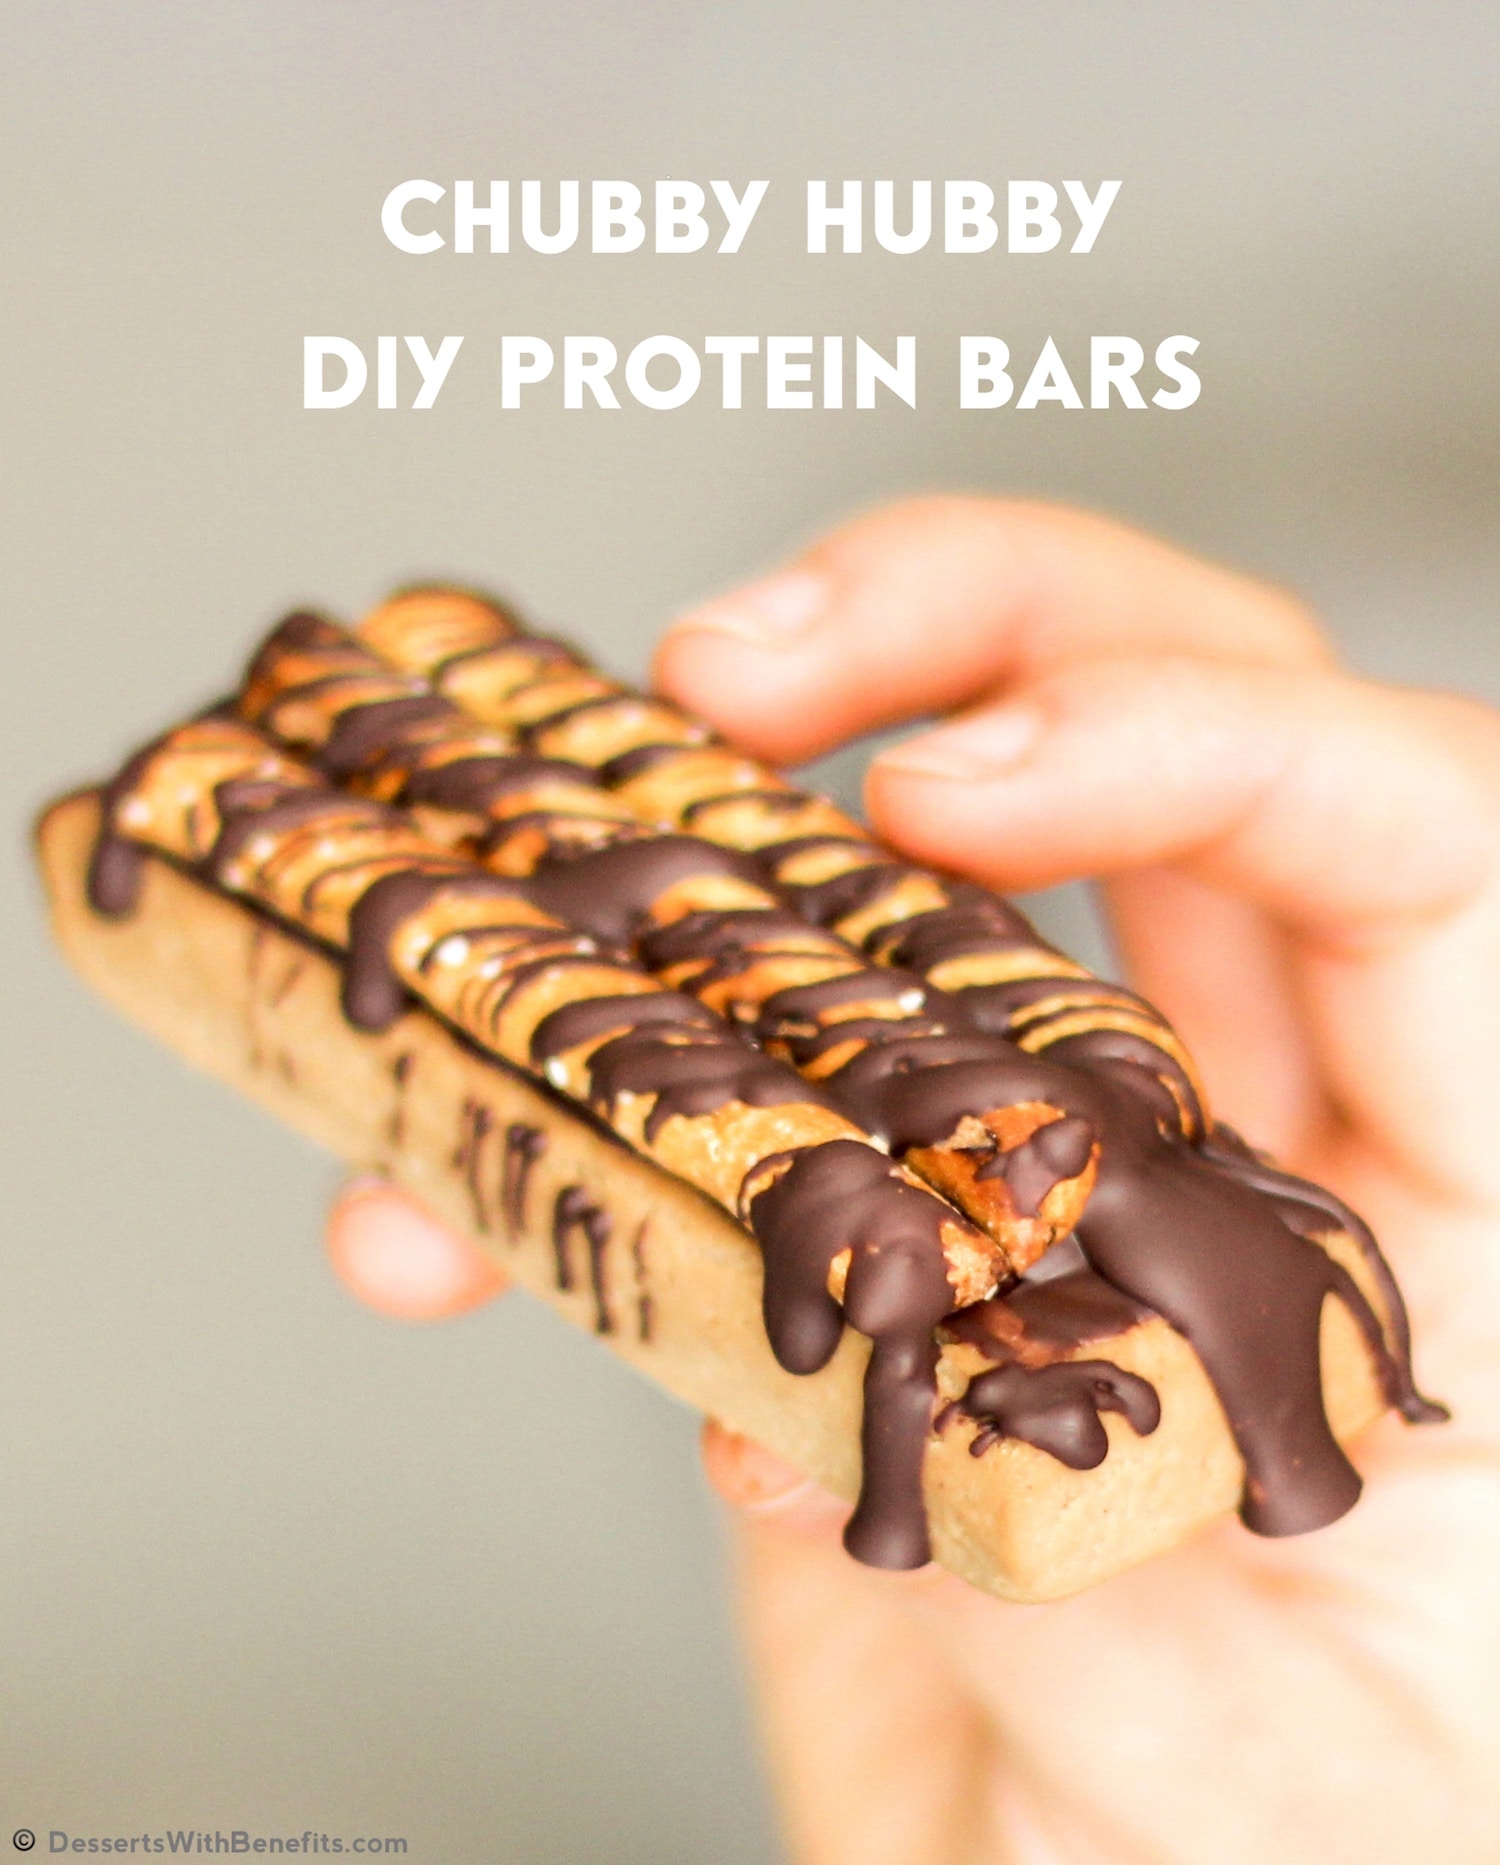 Healthy Chubby Hubby DIY Protein Bars from the DIY Protein Bars Cookbook (high protein, high fiber, gluten free option, vegan option)